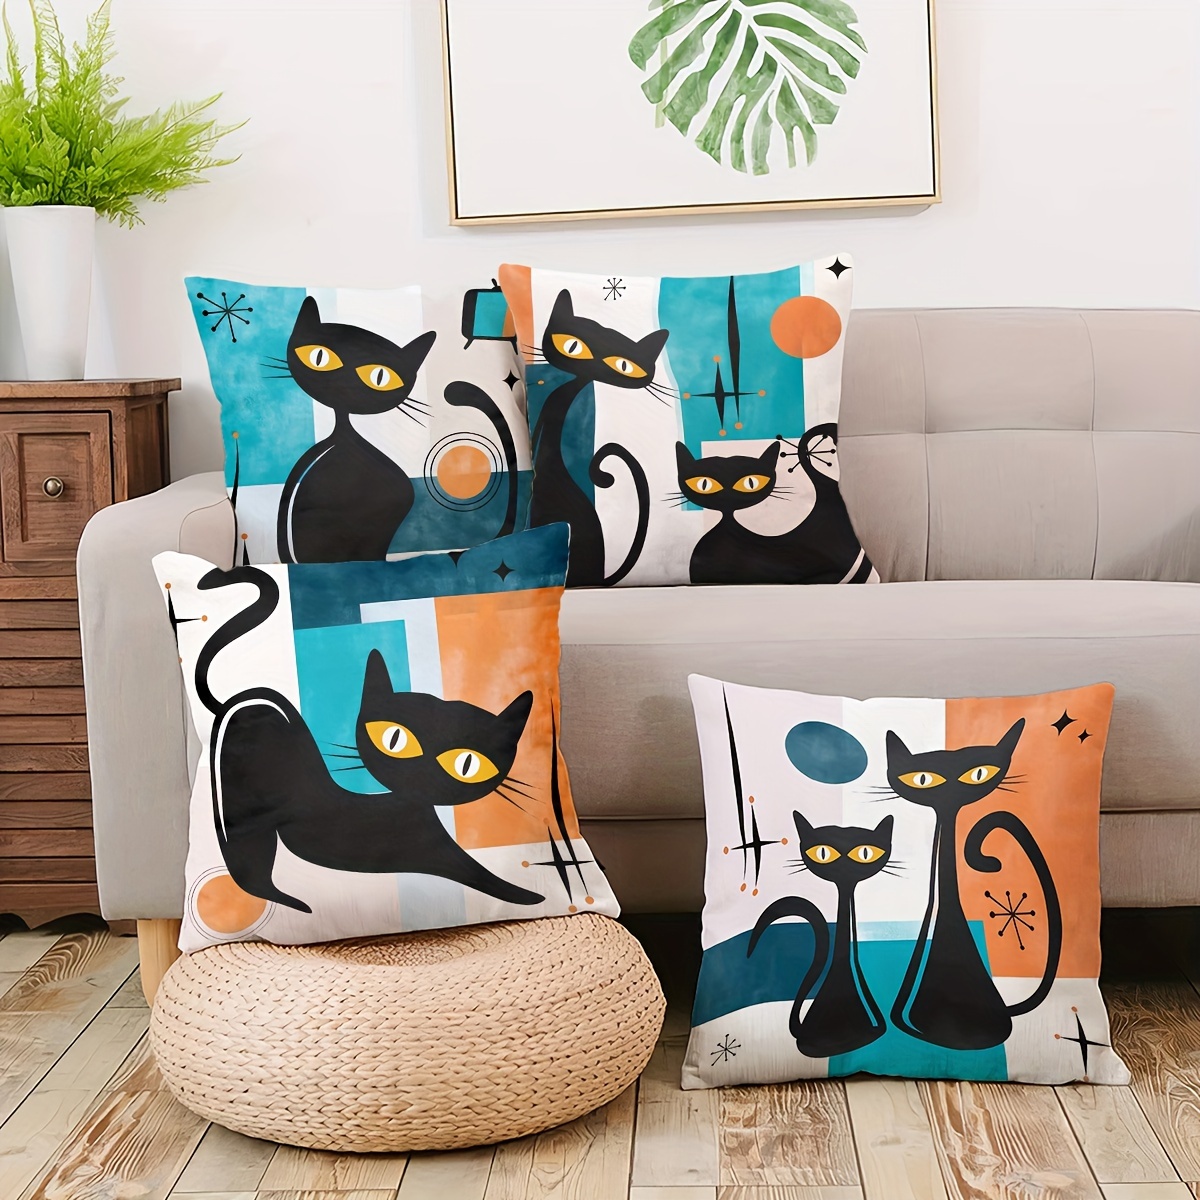 

4pcs, Short Plush Pillow Cushion Cover Cushion Cover Pillow Cover Ultra Soft Single-sided Printing18in*18in Black Cat Sofa Car Cushion No Pillow Core